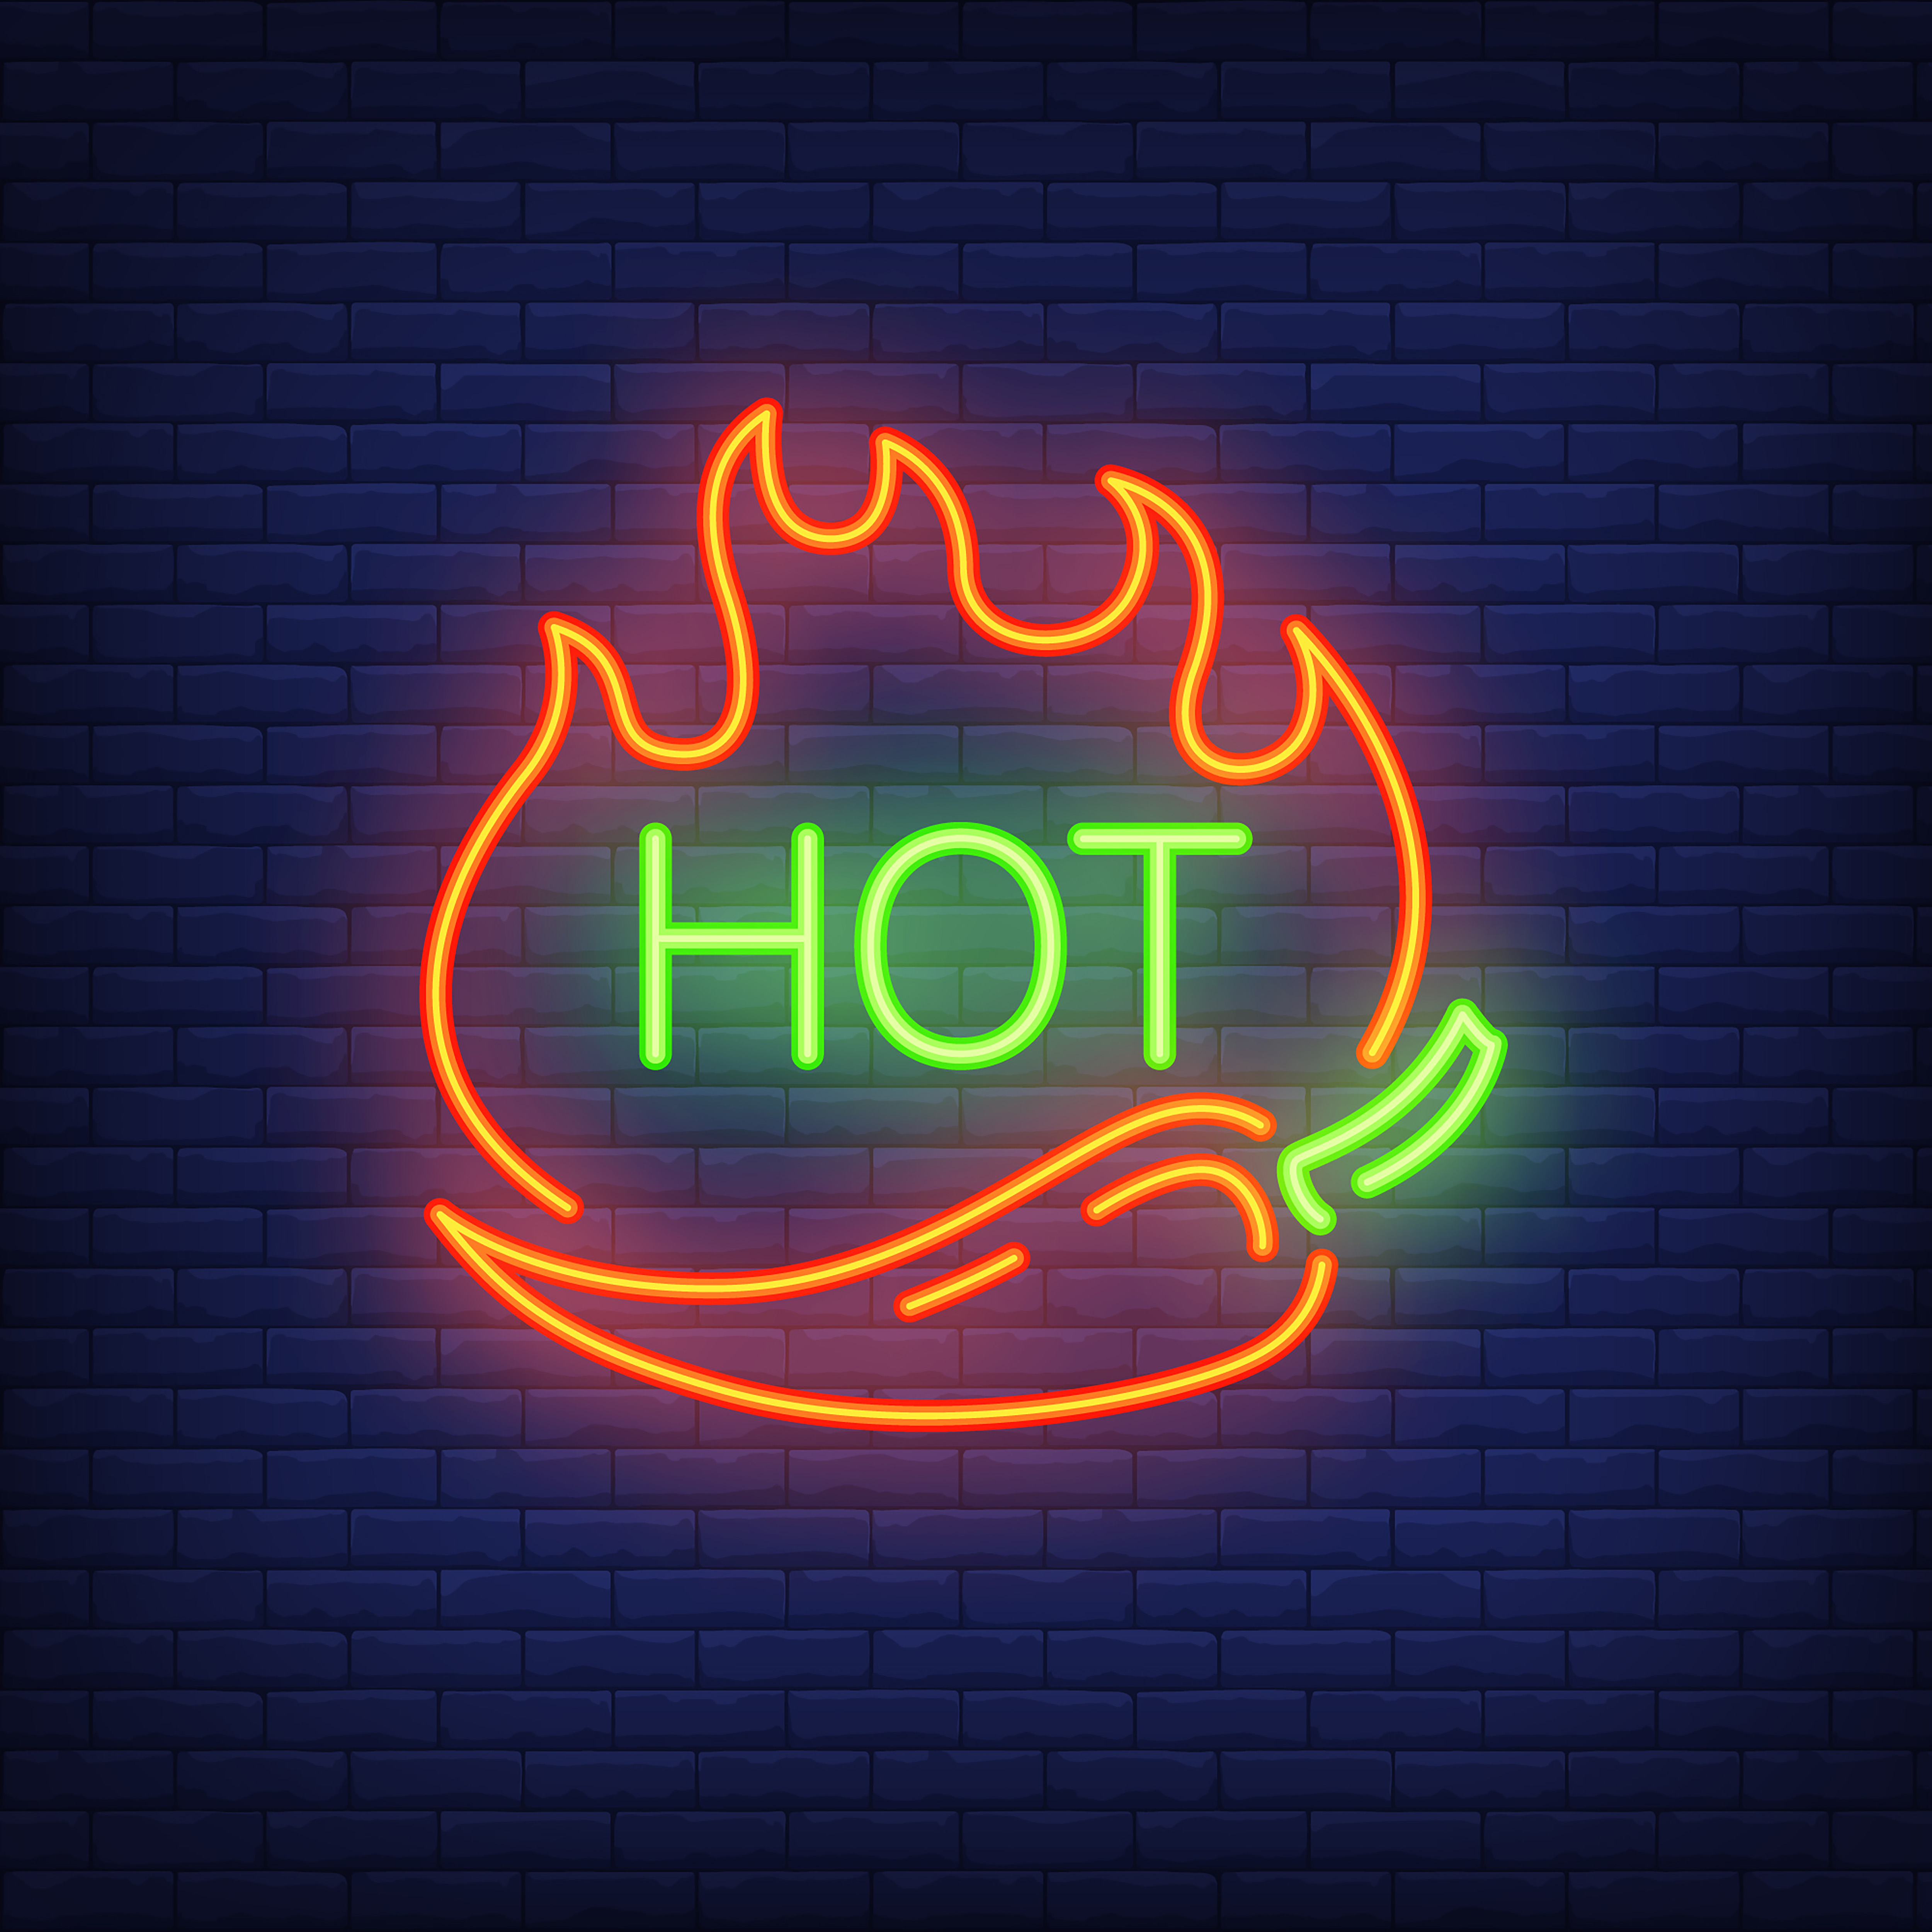 Hot chili neon sign with fire. night bright advertisement